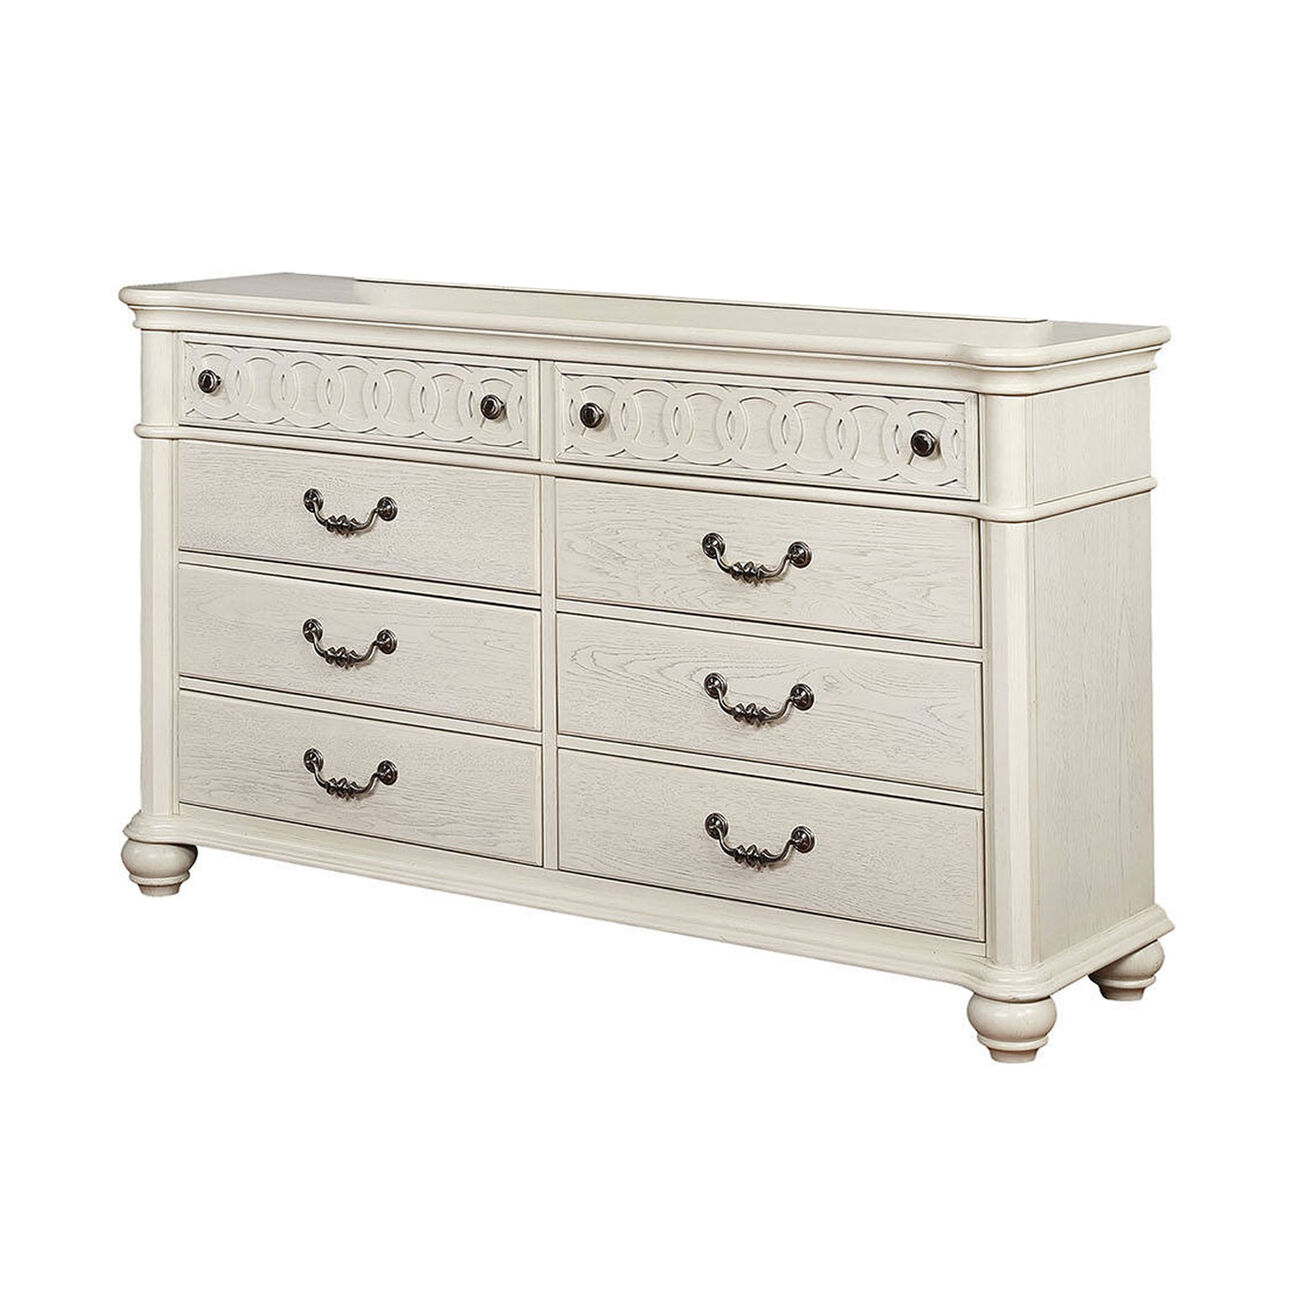 Wooden 8 Drawers Dresser with Turned Legs and Metal Pulls, White